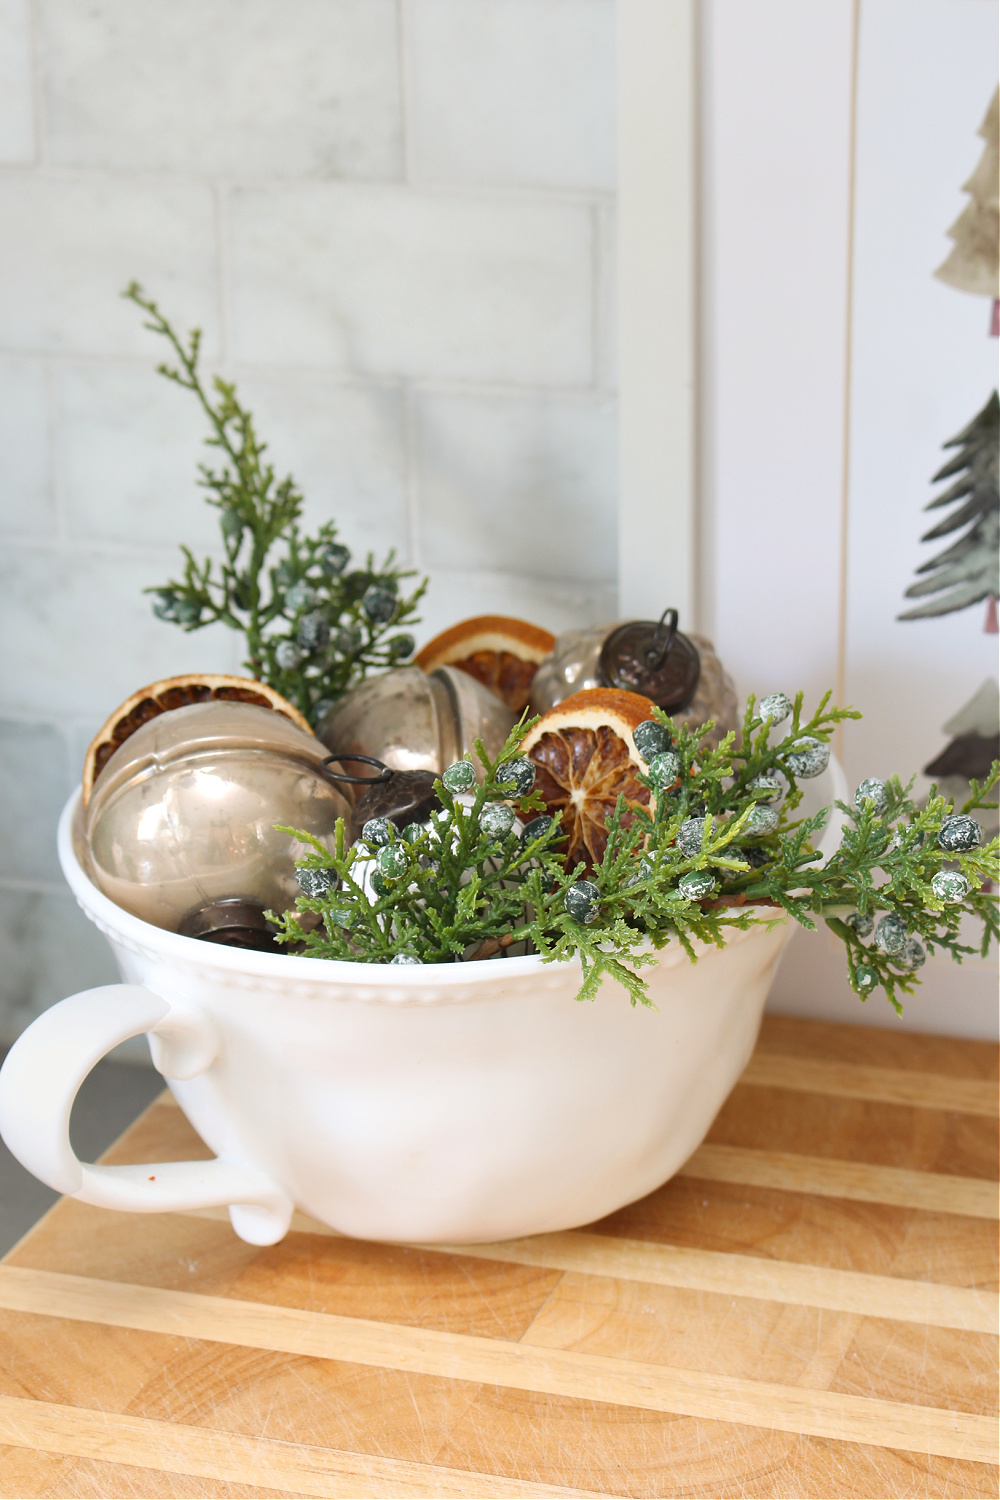 Greenery, ornaments, and dried oranges in a kitchen bowl.